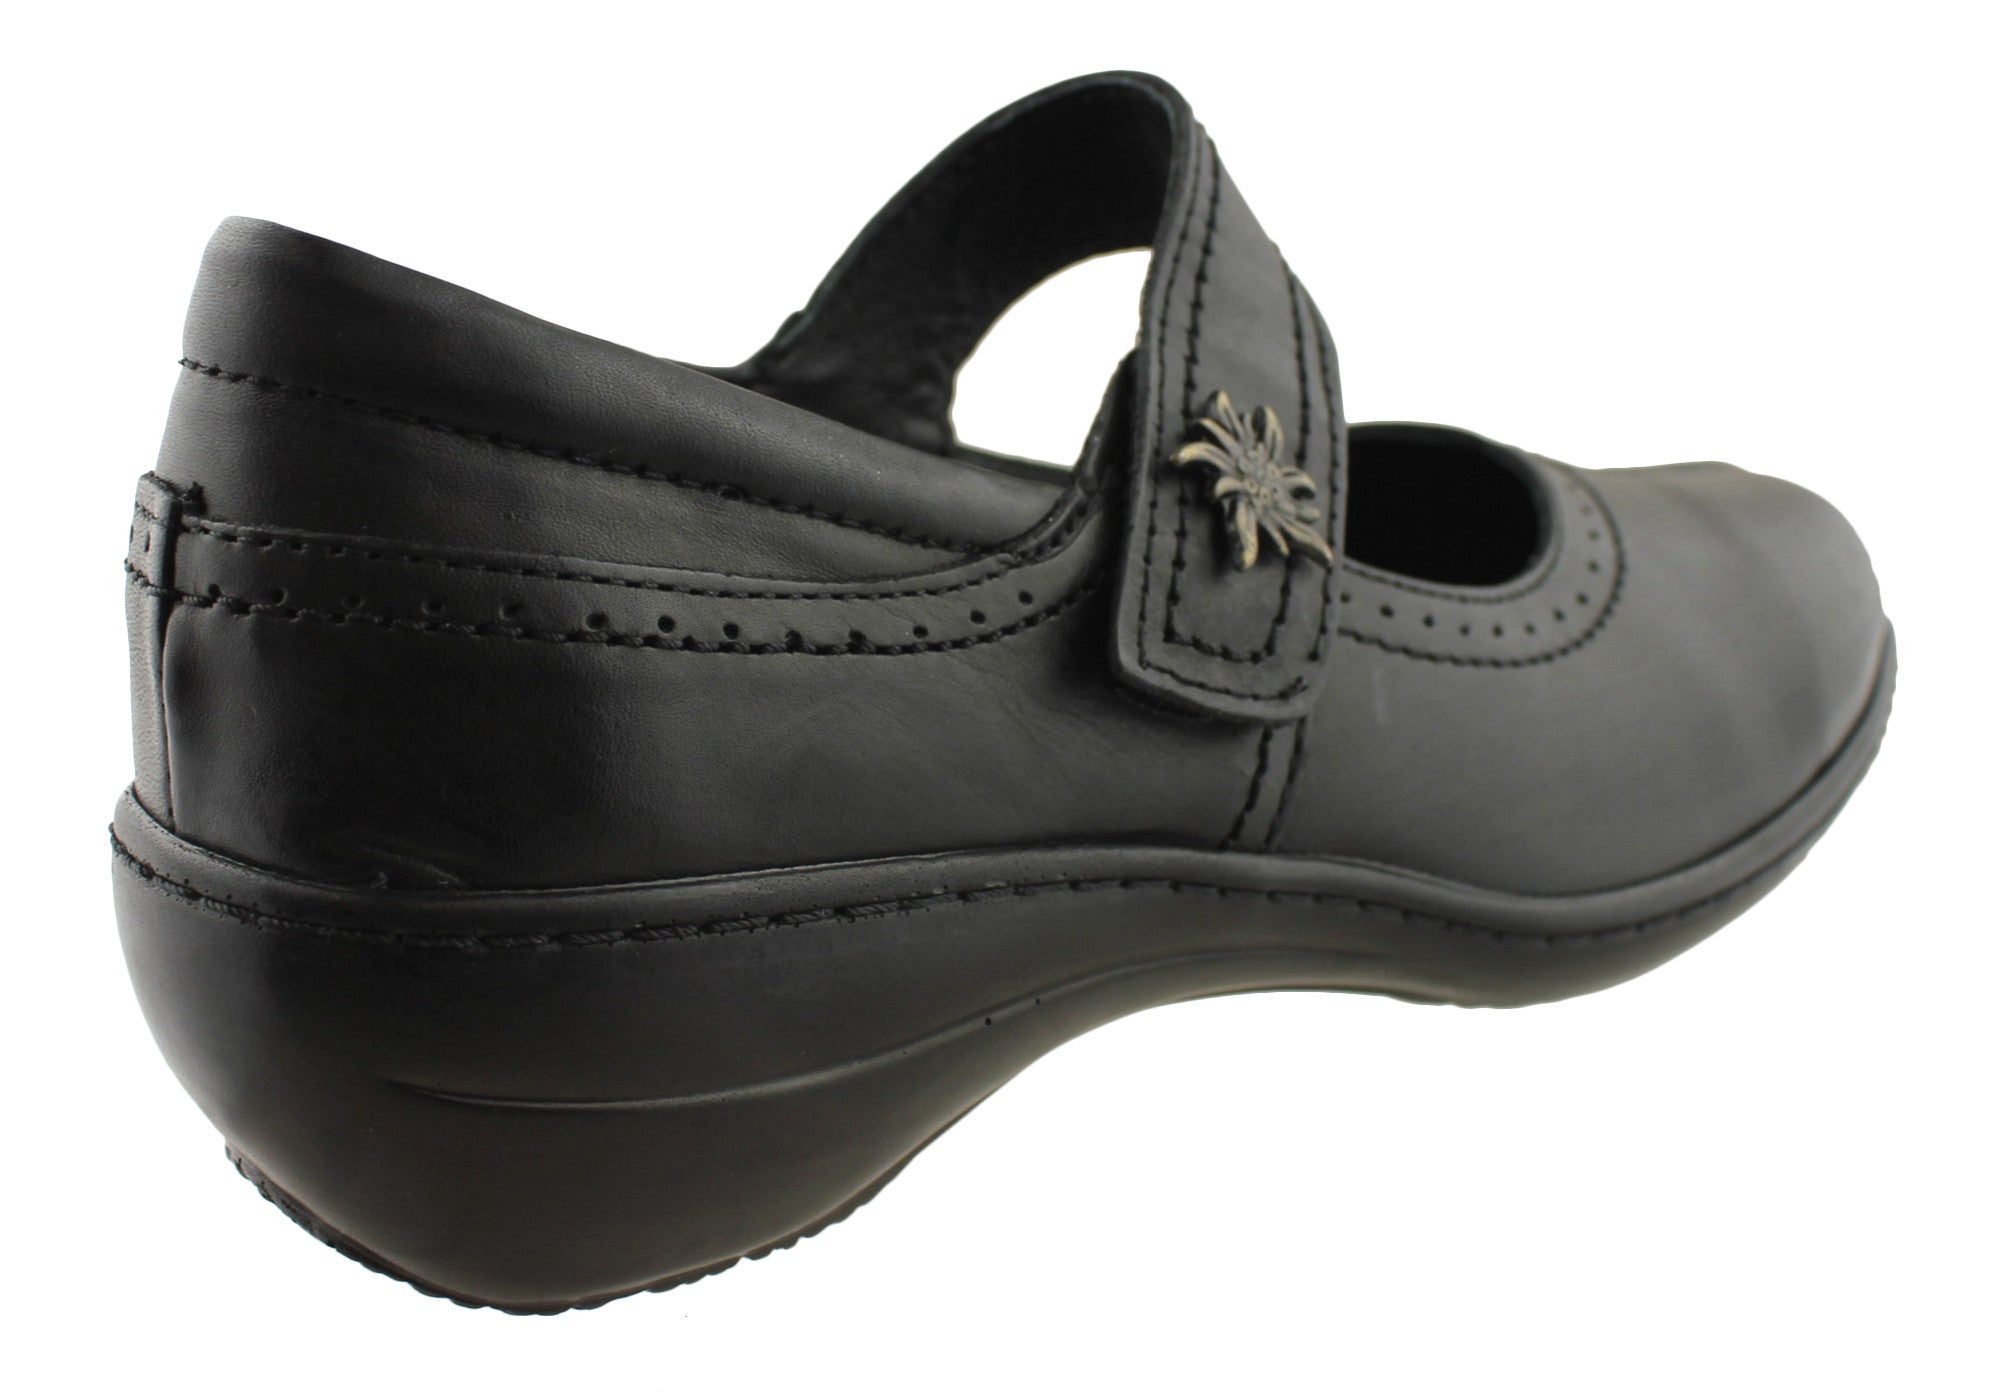 Cabello Comfort 961-21 Womens Leather Mary Jane Shoes